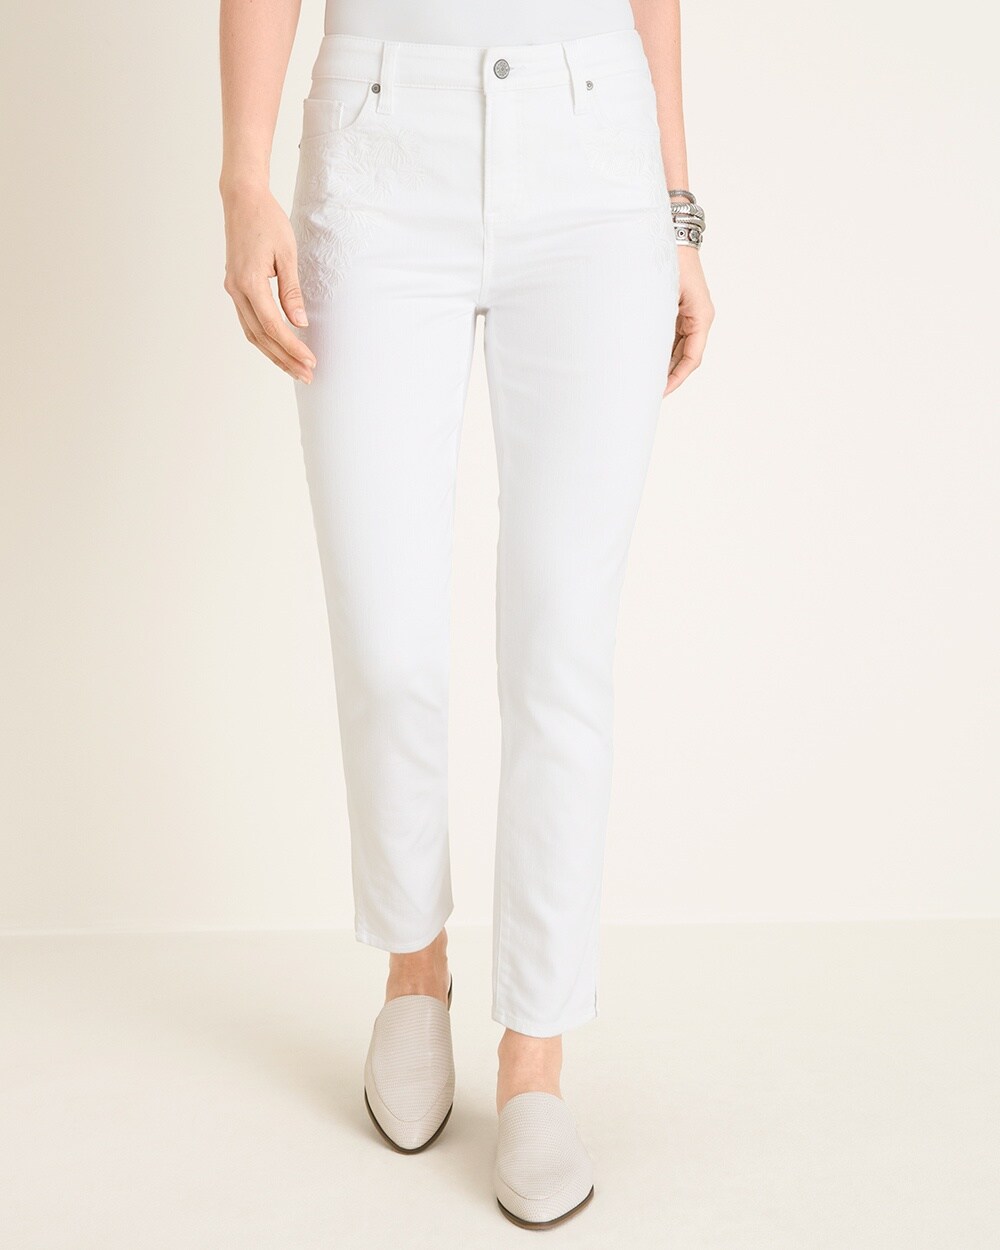 So Slimming No-Stain White Embroidered Girlfriend Ankle Jeans